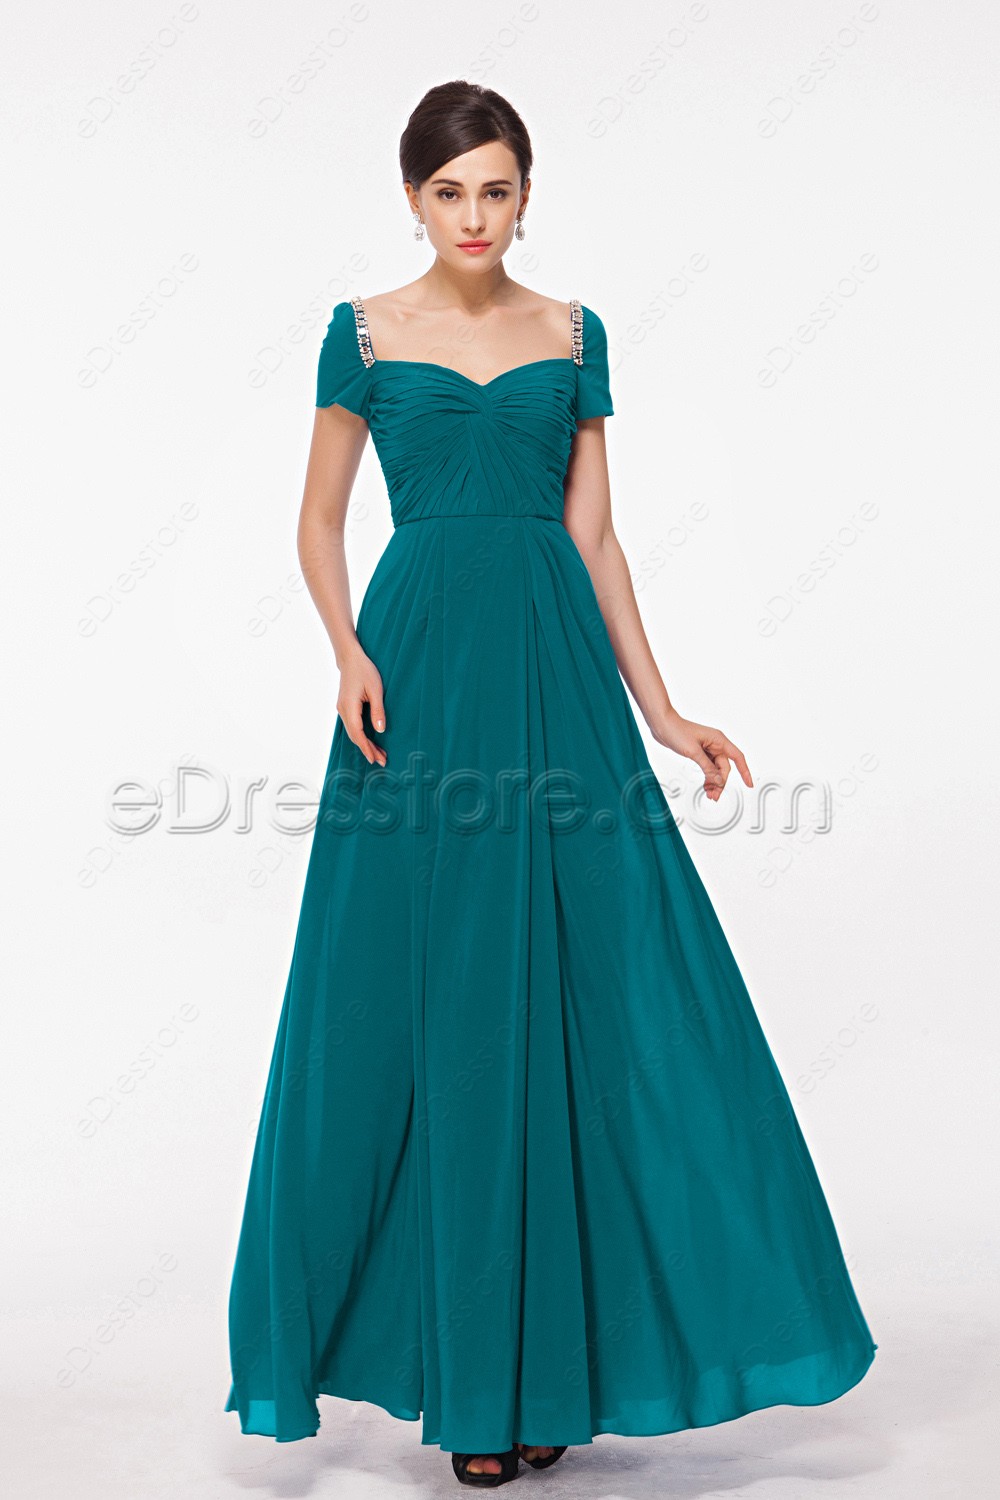 Modest Teal Prom Dresses with Sleeves